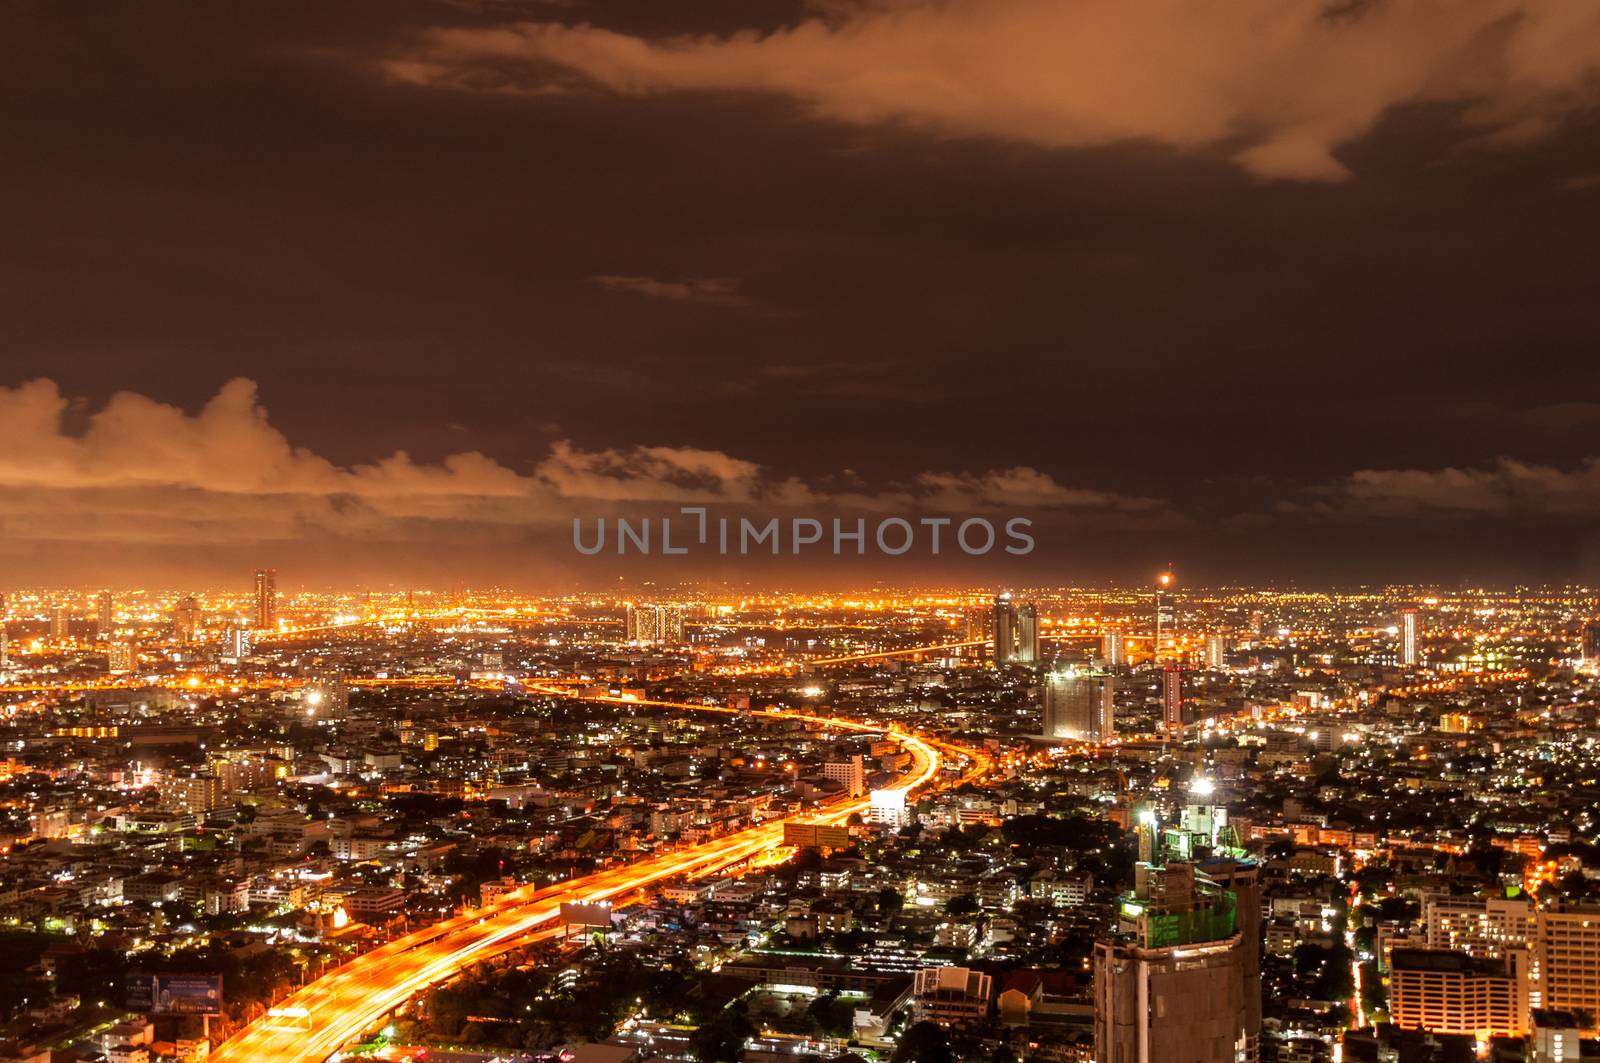 Panorama view of Bangkok city scape at nighttime by weltreisendertj